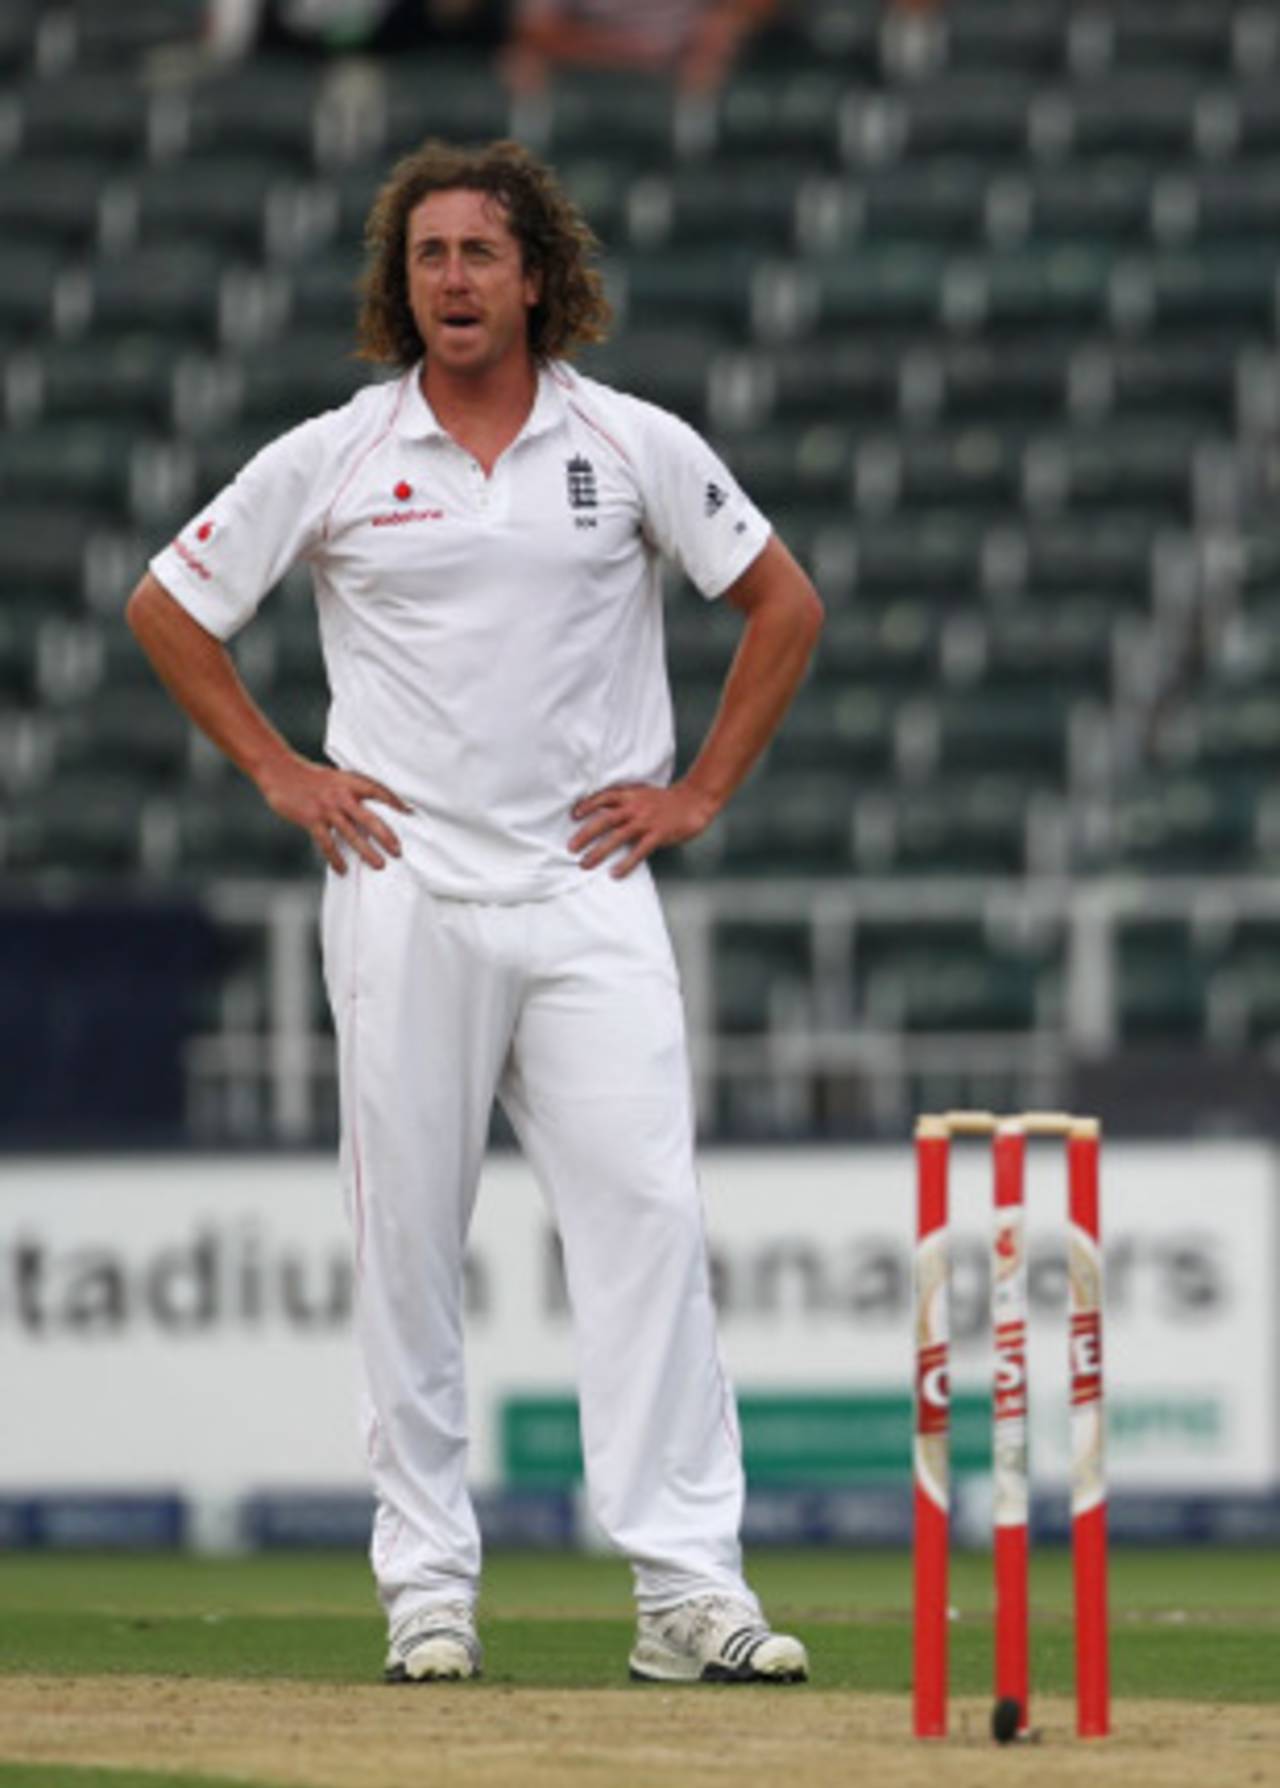 Ryan Sidebottom obtained prodigious swing, but the reasons given for his inclusion didn't quite stack up&nbsp;&nbsp;&bull;&nbsp;&nbsp;Getty Images